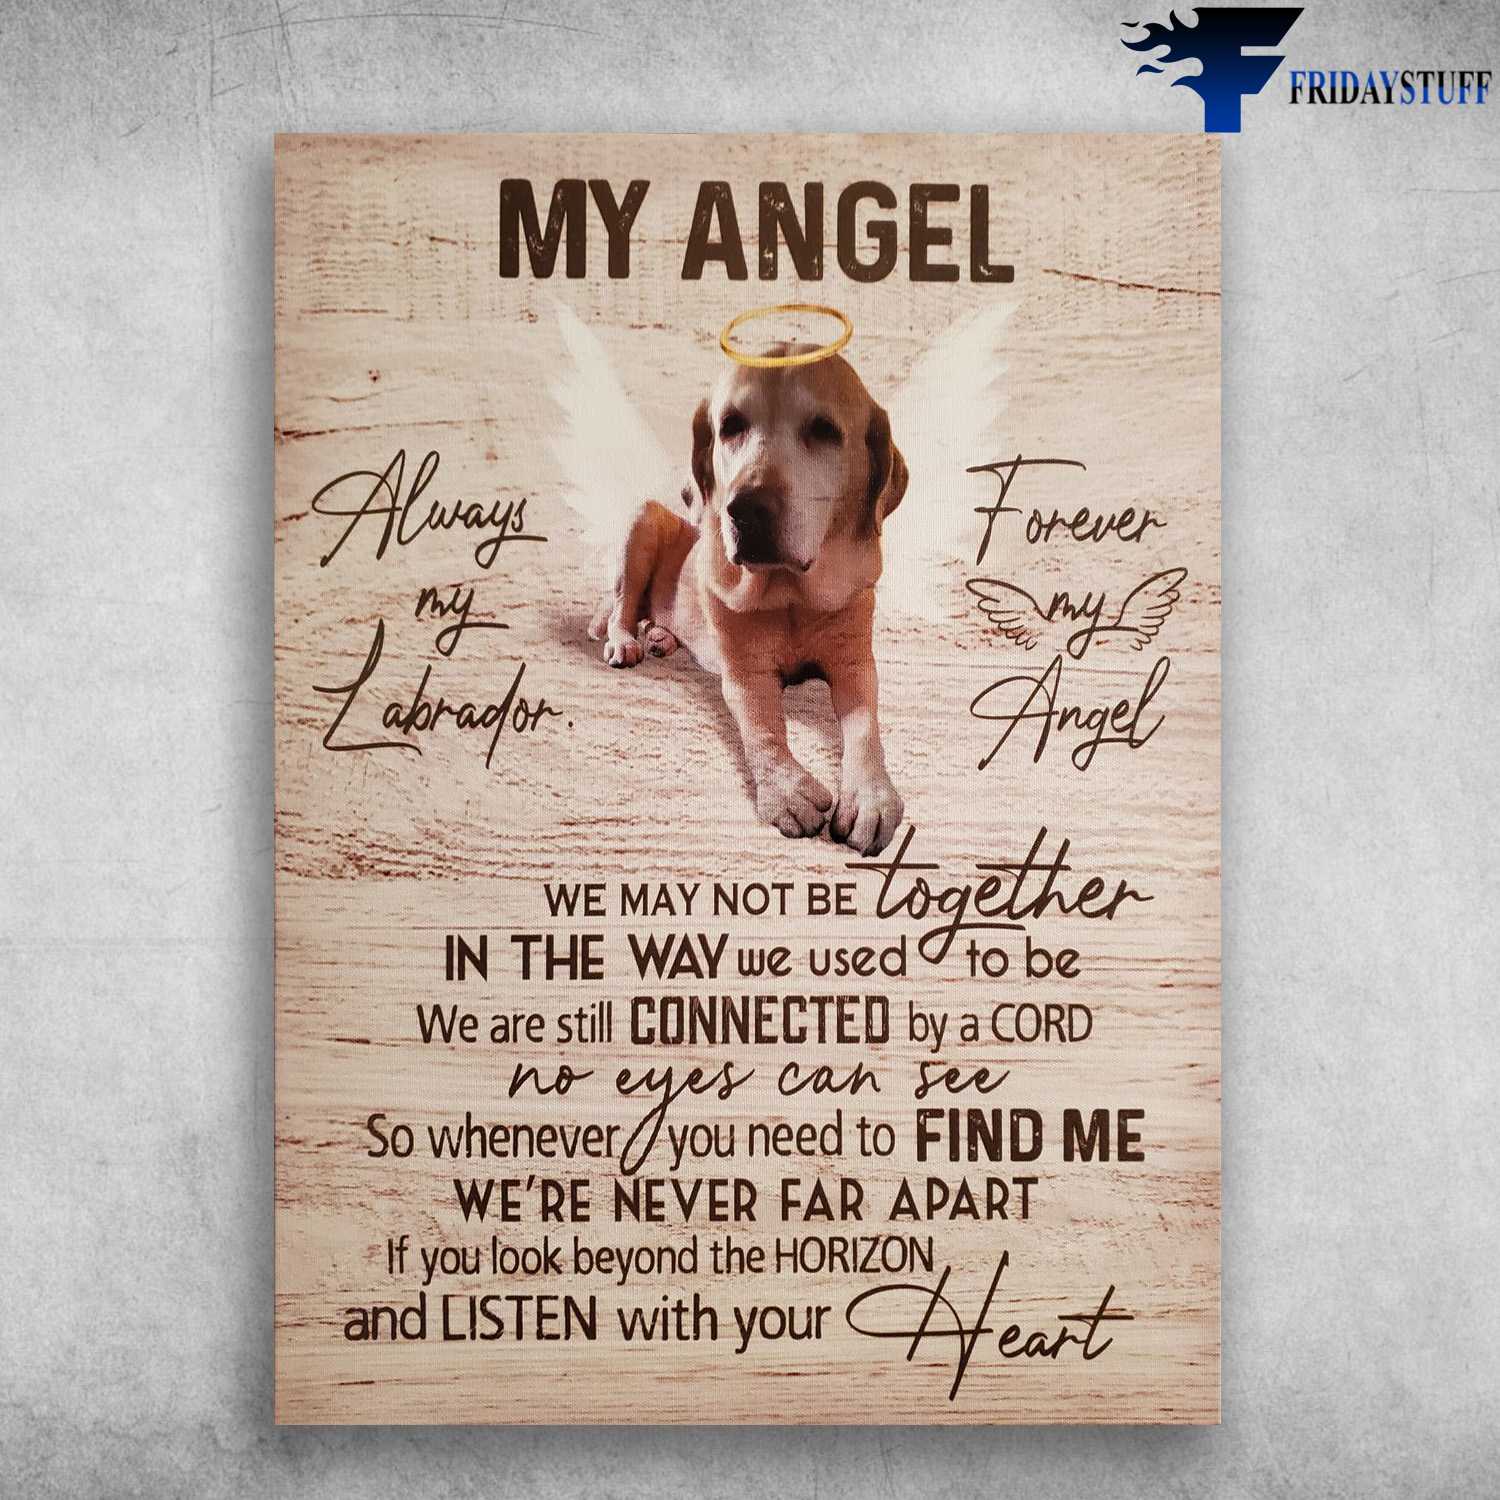 Angel Dog - Always My Labrador, Forever My Angel, We May Not Be Together, In The Way We Used To Be, We Are Still Connected By A Cord, No Eyes Can See